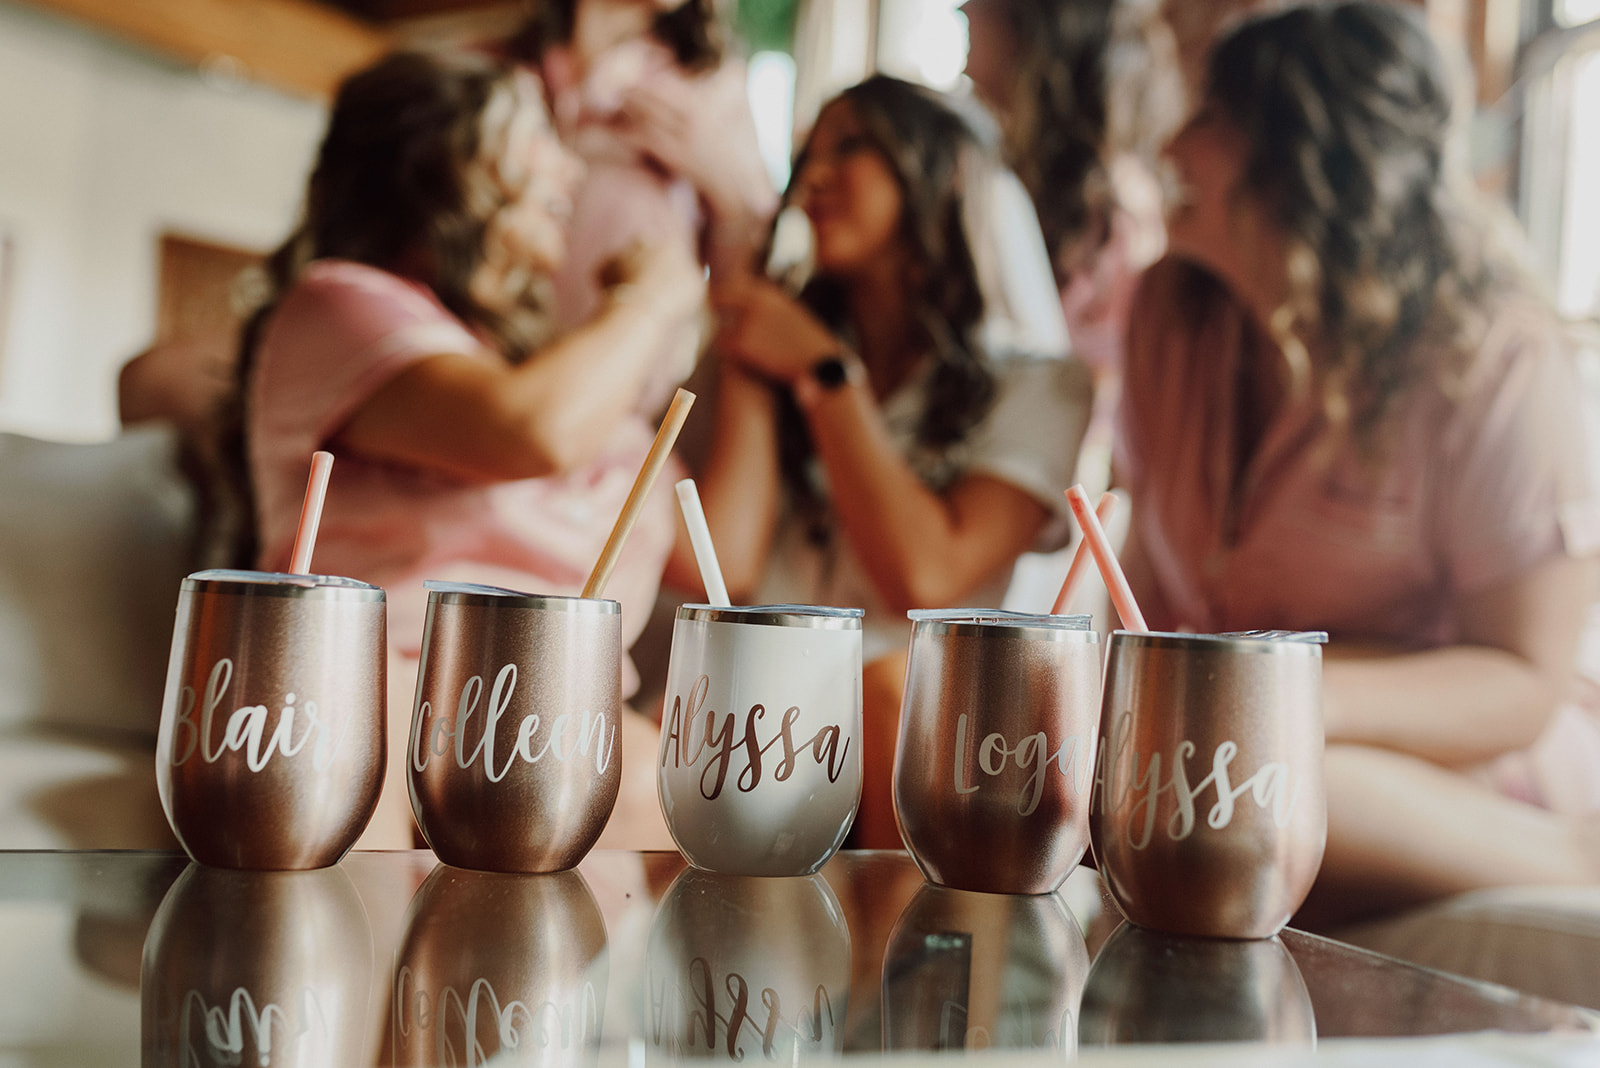 8 Bachelorette Party Themes and Ideas: Bride and her bridesmaids during talking during their bachelorette party with cups with their names on it in front of them